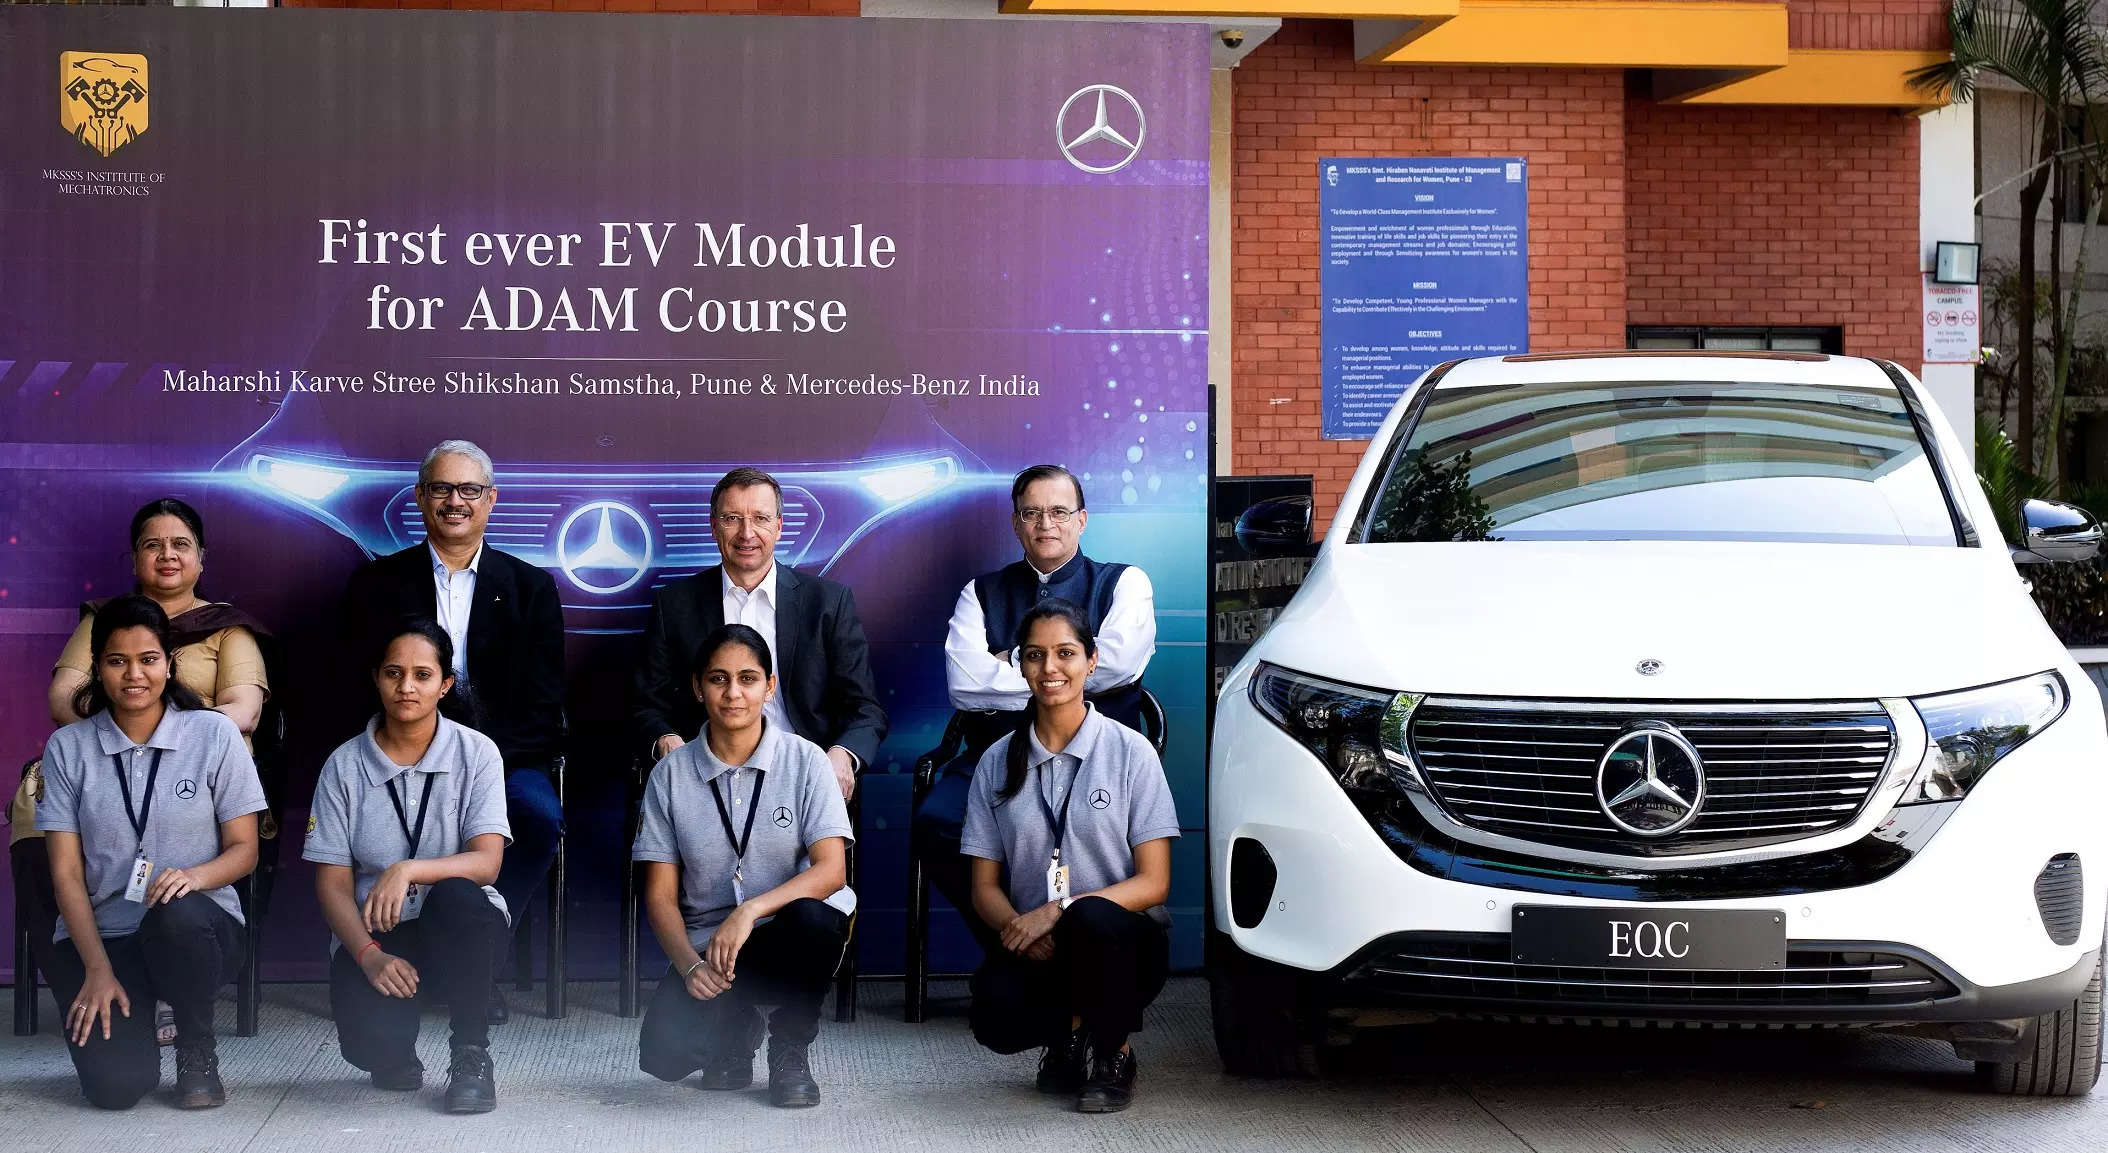  The EV module will be a part of a 12-month Advanced Diploma in Automotive Mechatronics (ADAM) course, a unique public-private partnership initiative aimed to upskill students with the latest technological advancements.